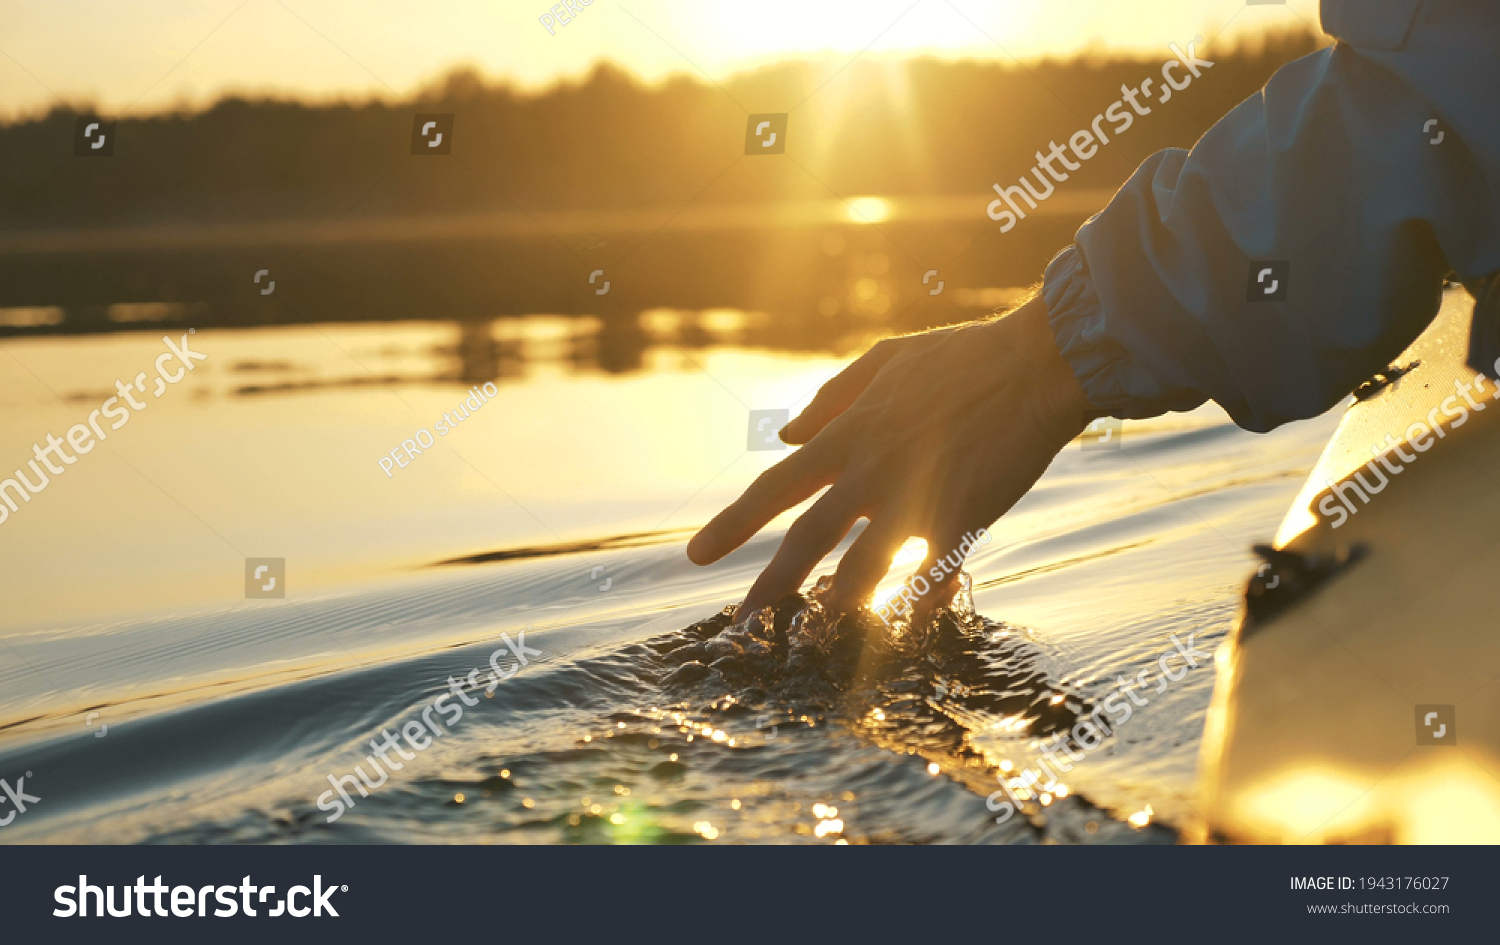 man puts fingers down in lake kayaking against backdrop of golden sunset, unity harmony nature #1943176027